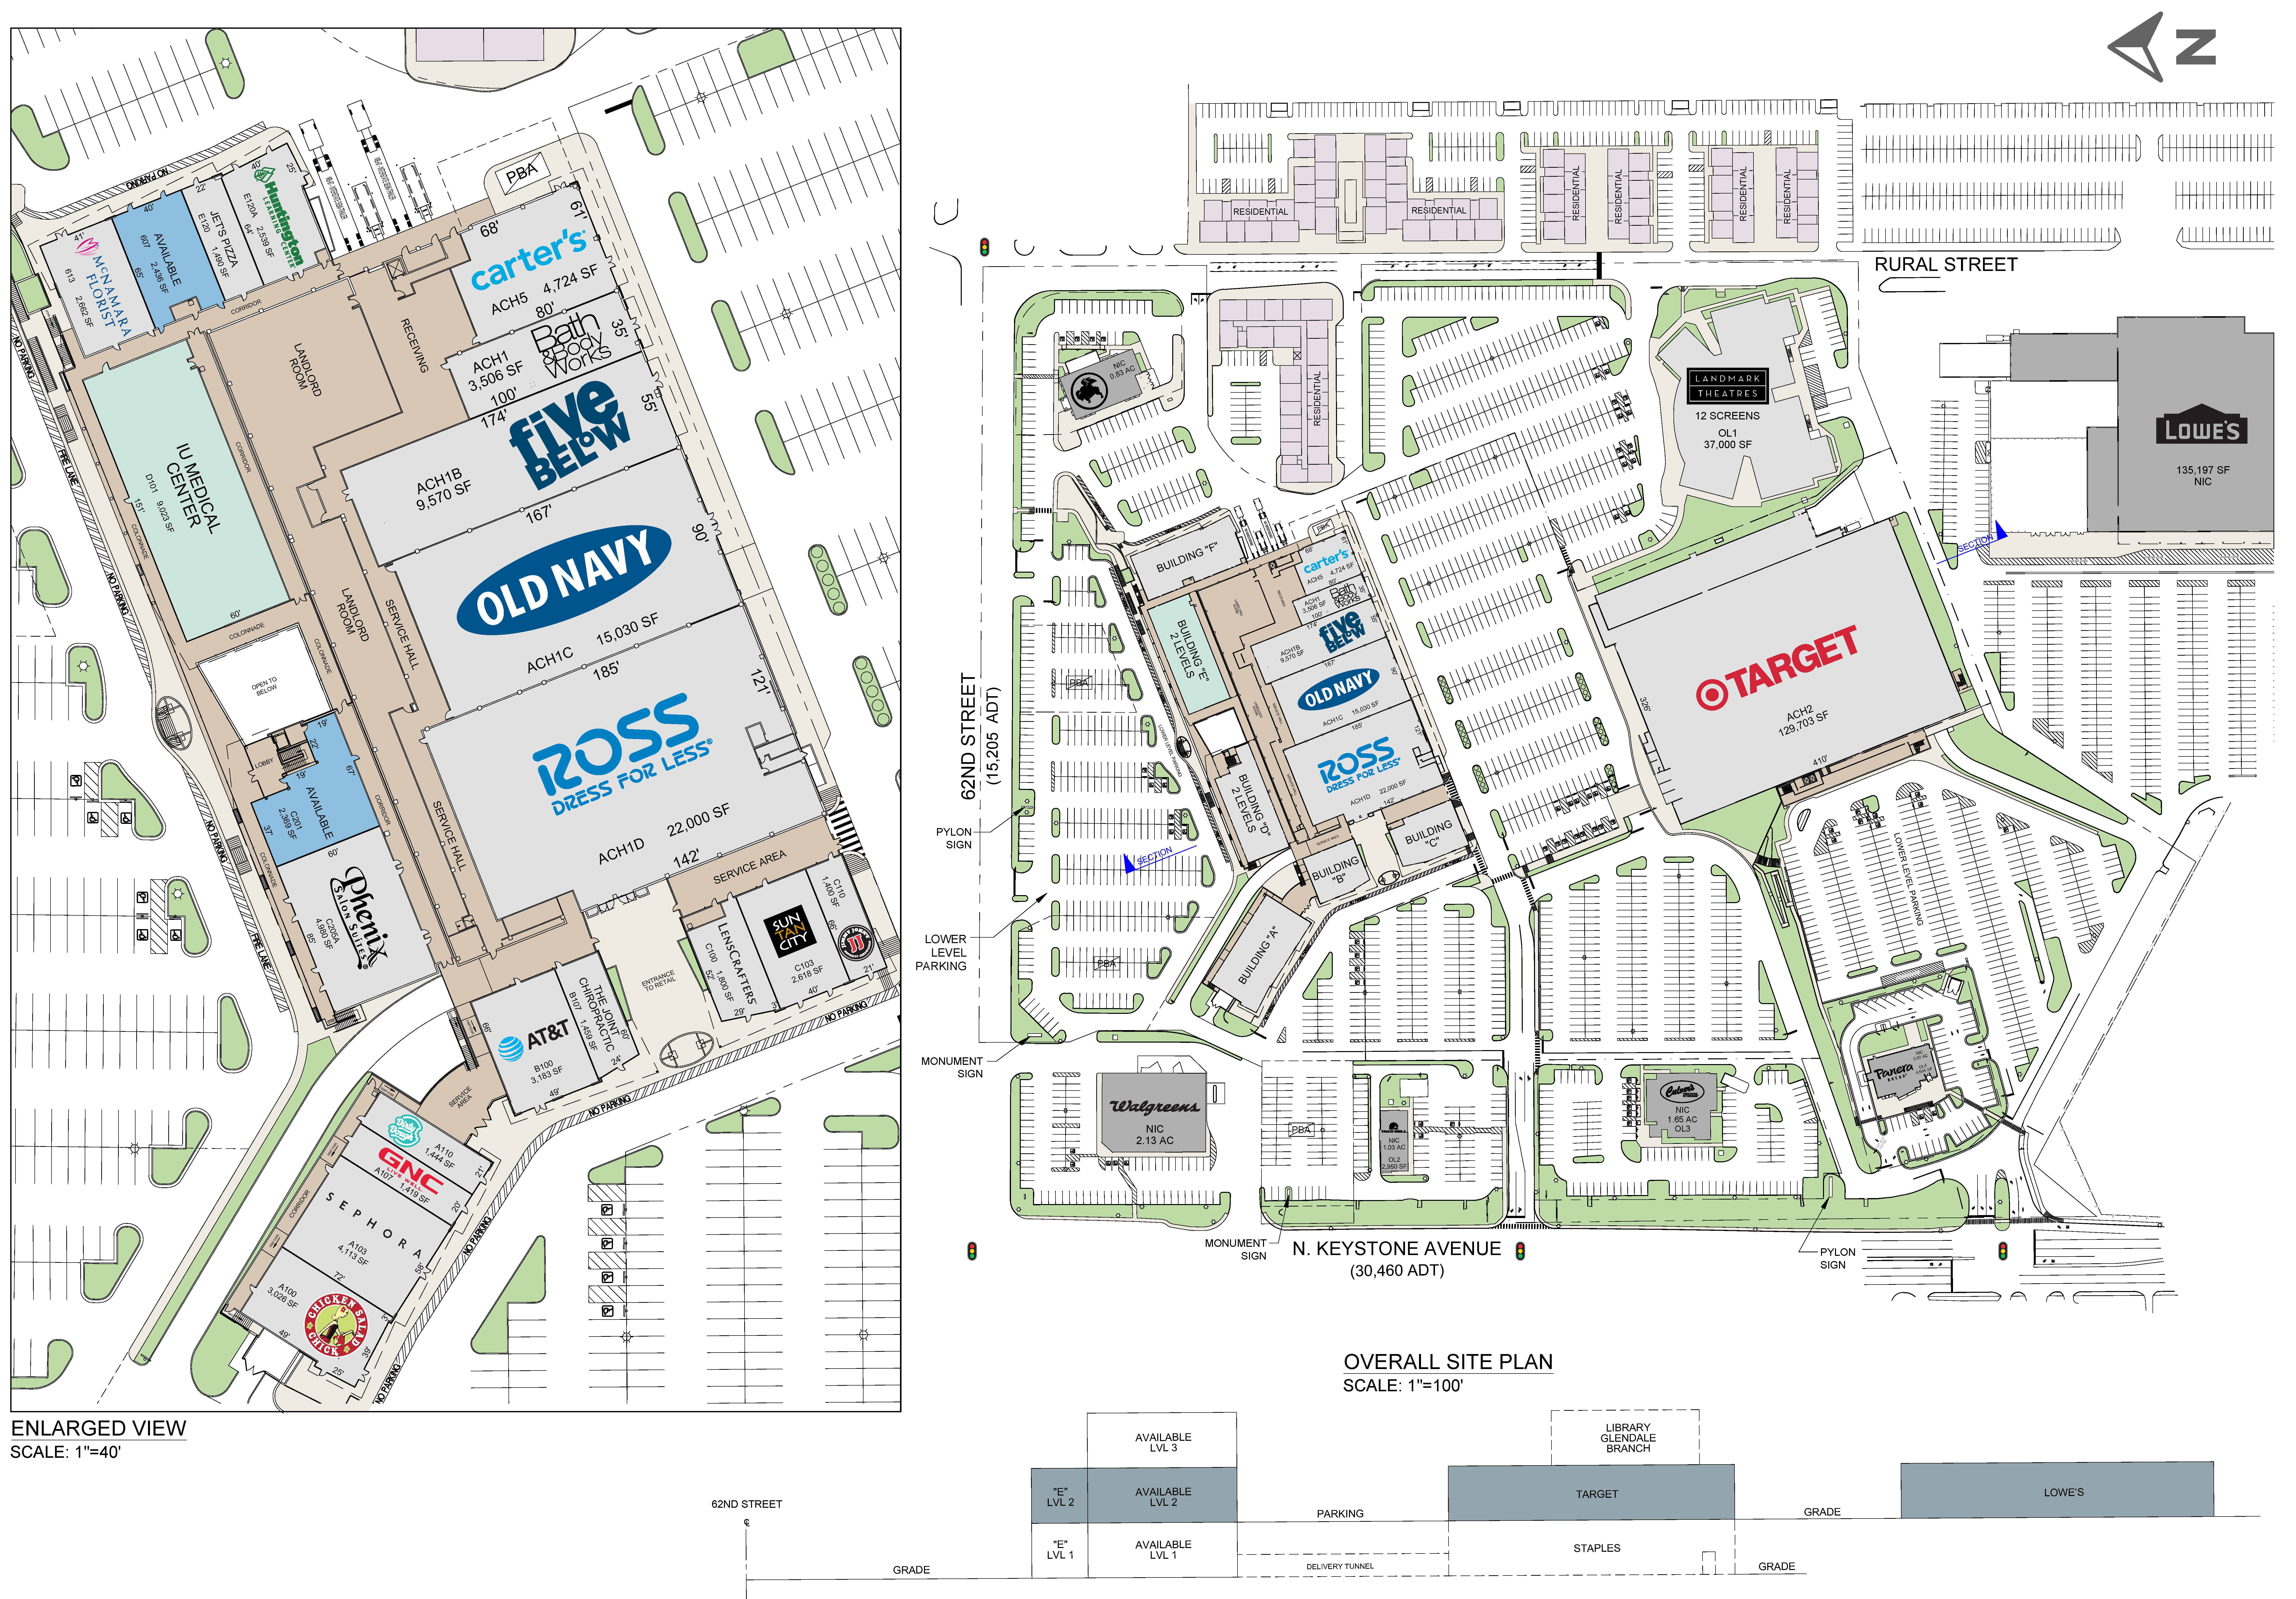 Tysons Galleria Directory & Map